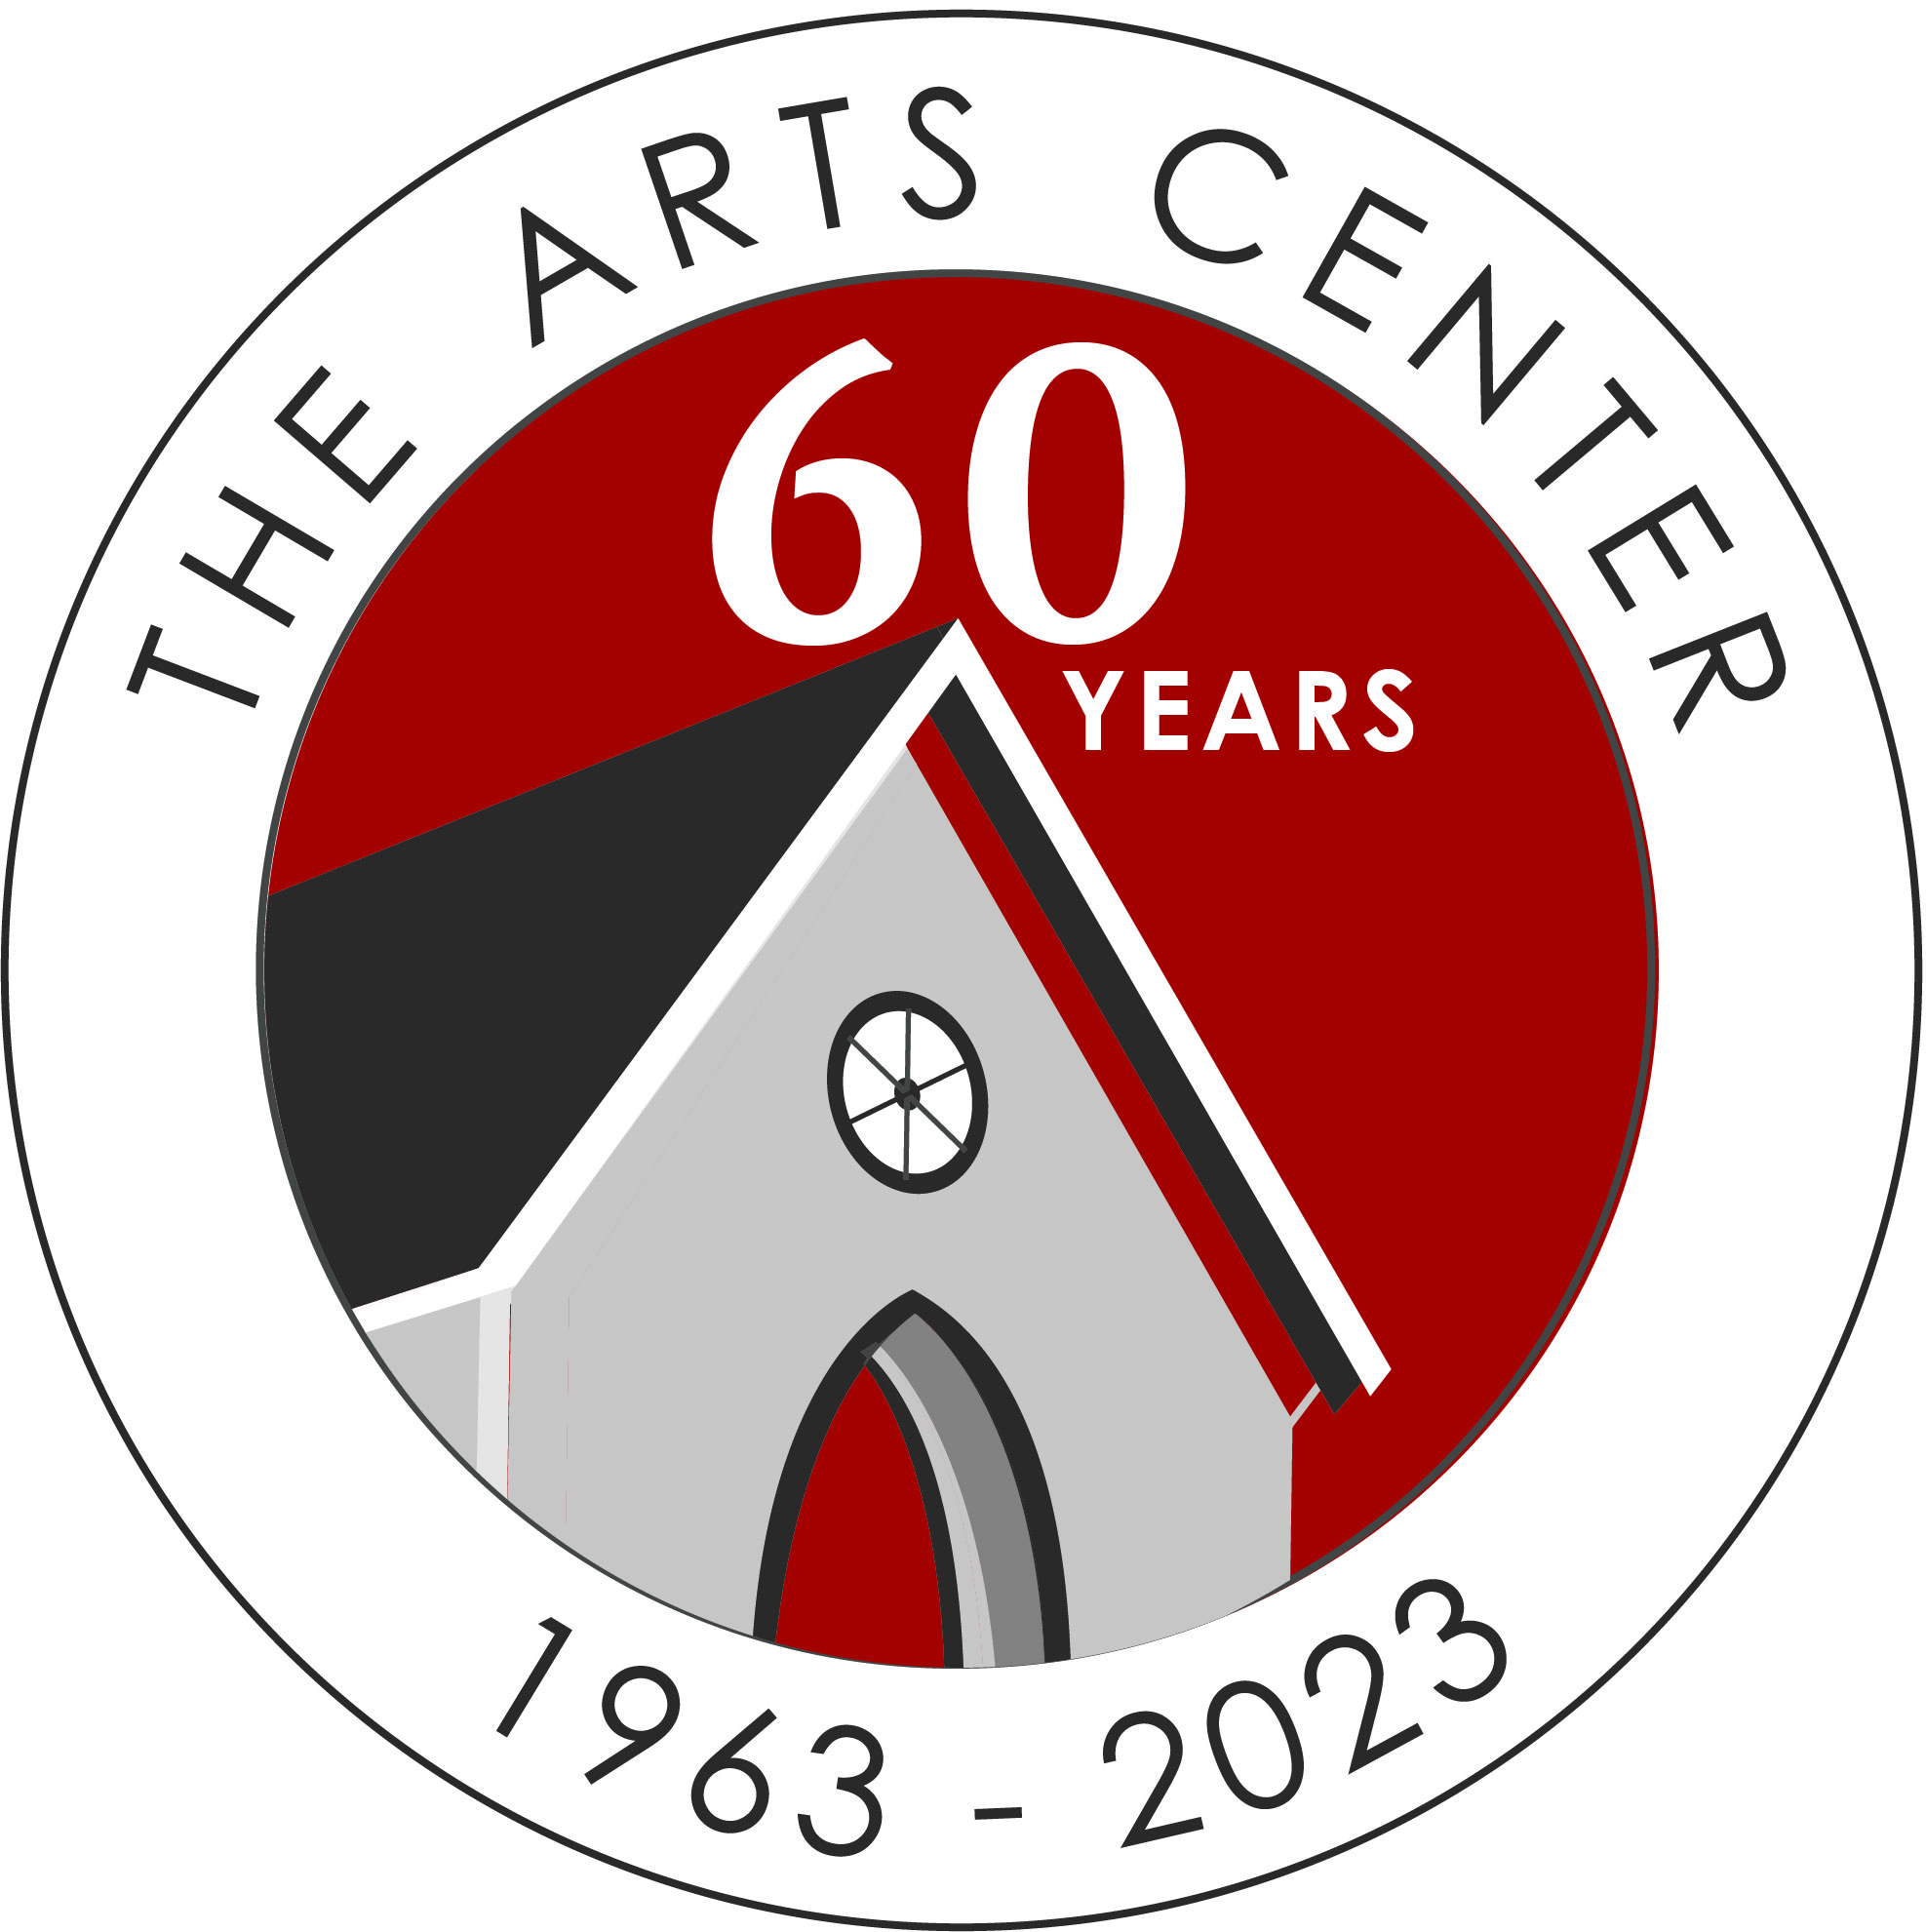 60th Birthday logo with image of building with 6ths 0th Years superimposed